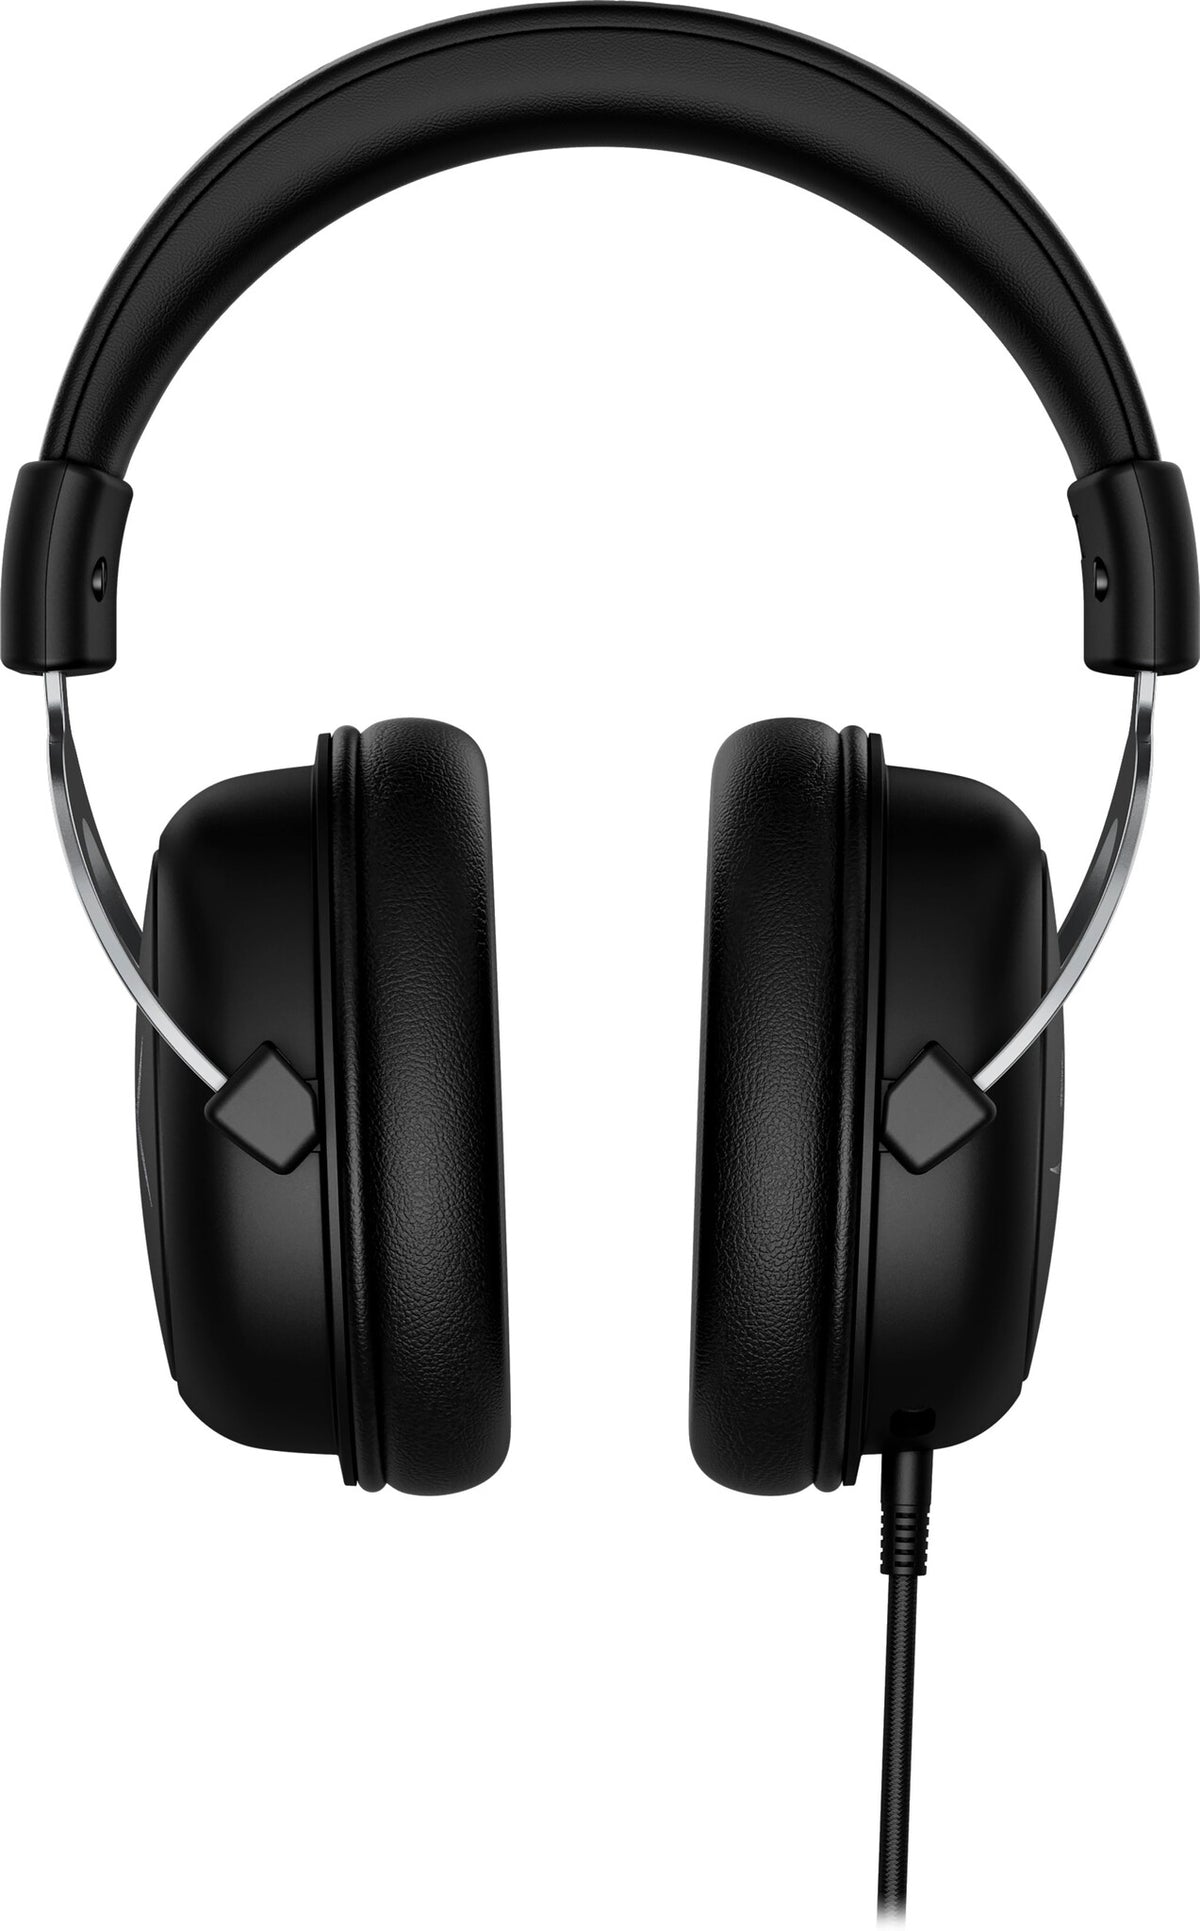 HyperX CloudX - Wired Gaming Headset for Xbox